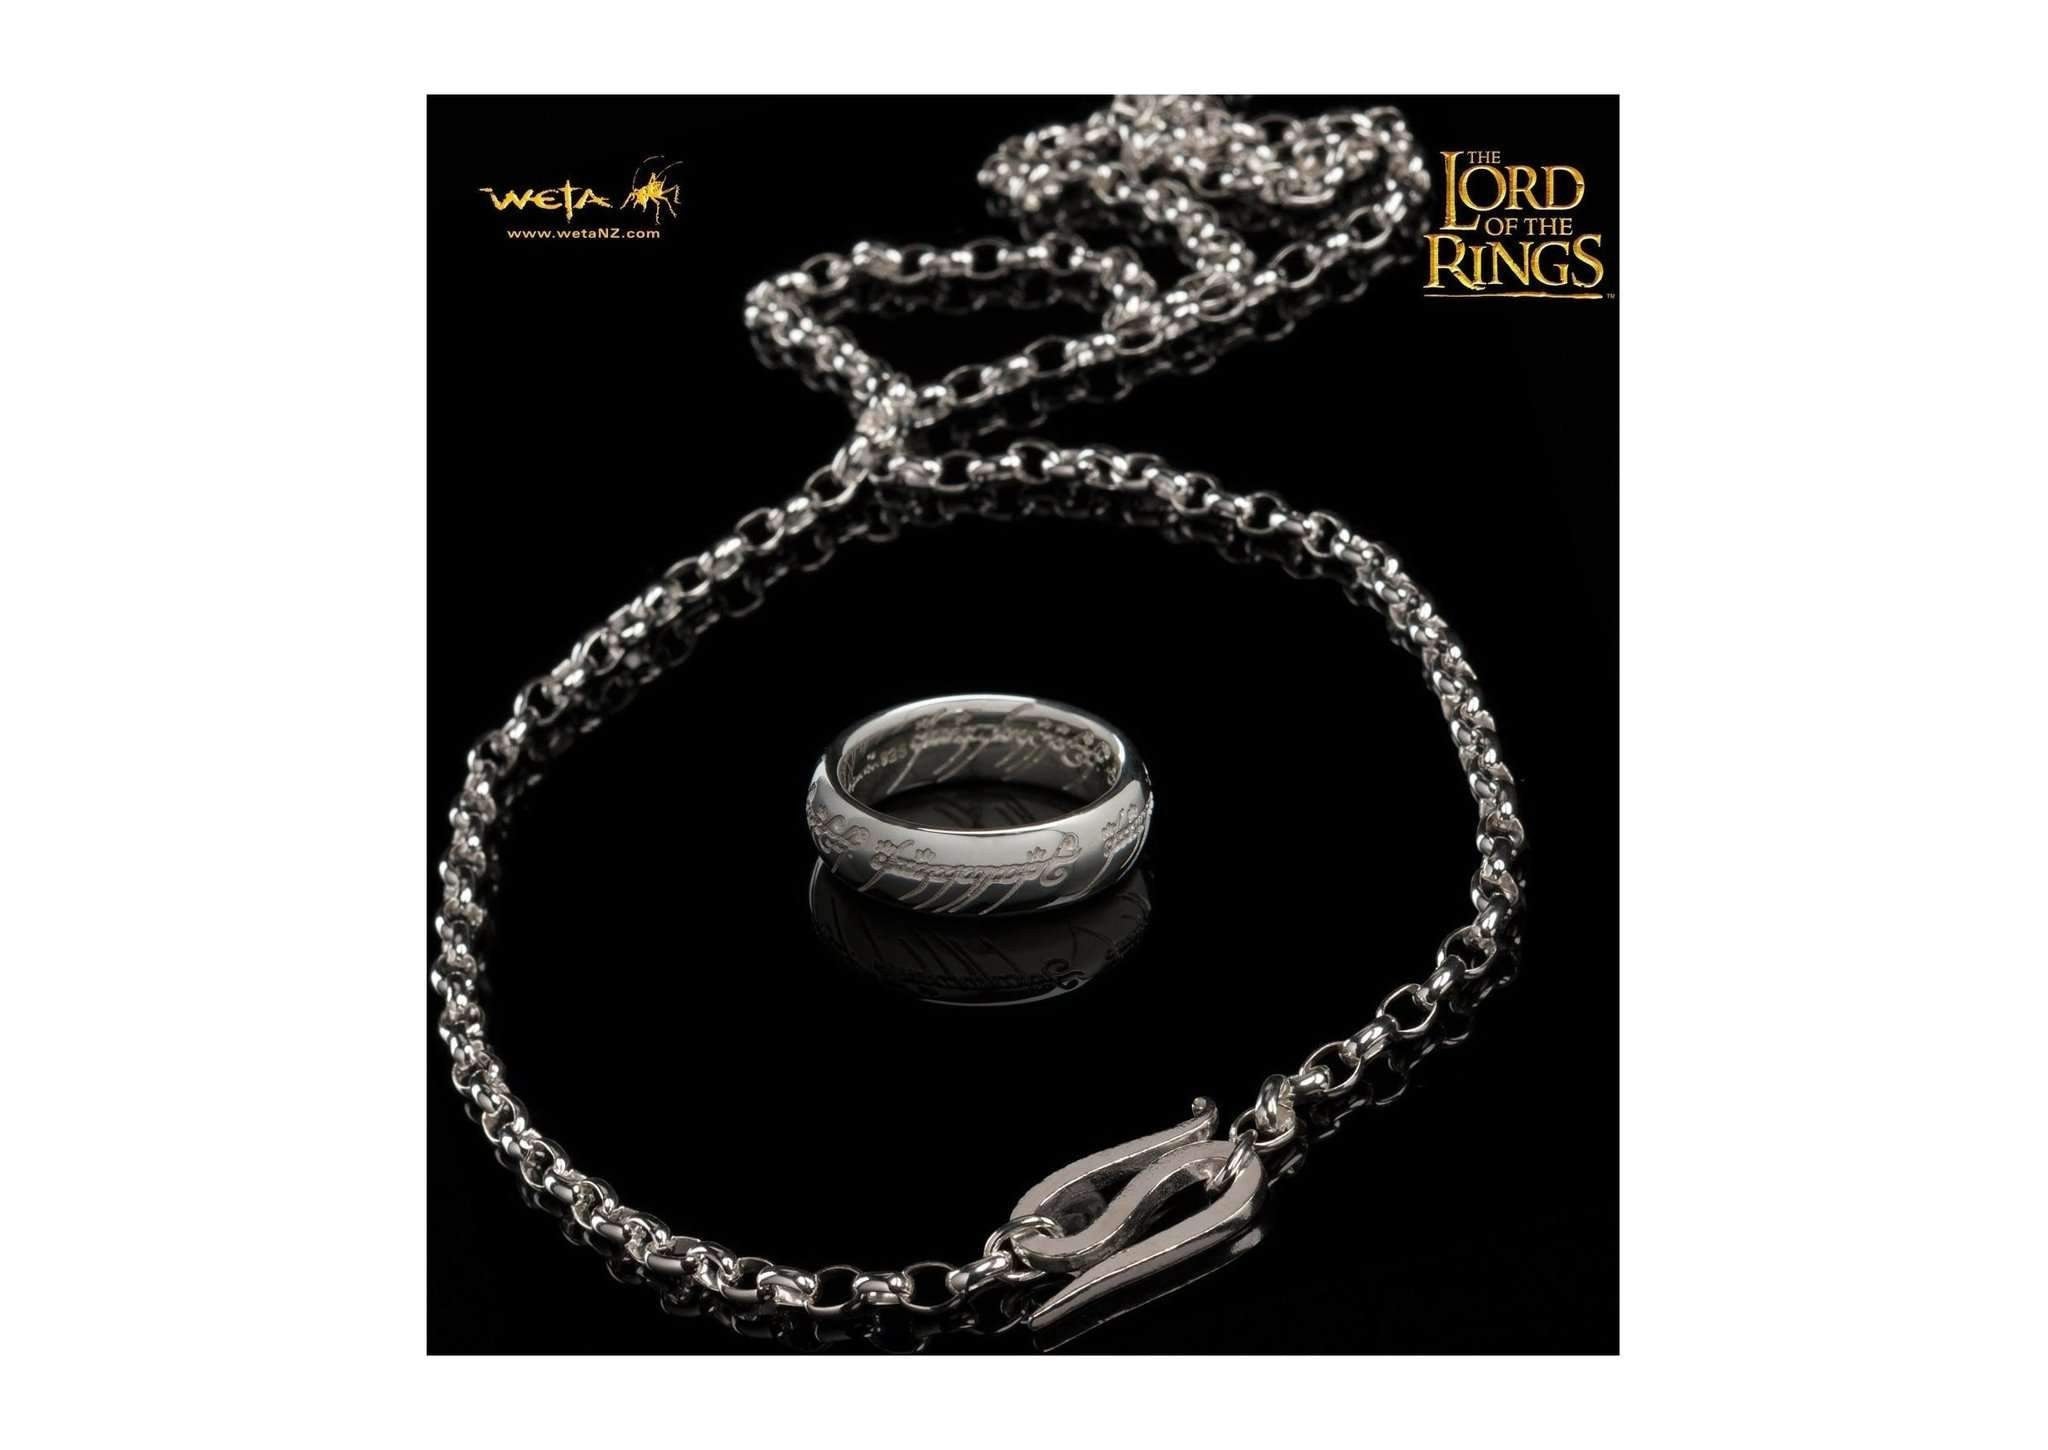 giulyscreations Ring Necklace Metal Nickel Free Unique Ring The Lord of the  Rings The Hobbit The Lord of The Rings Frodo Baggins Gollum Gandalf One Ring  Aragorn Arwen Sauron Cosplay : Amazon.co.uk: